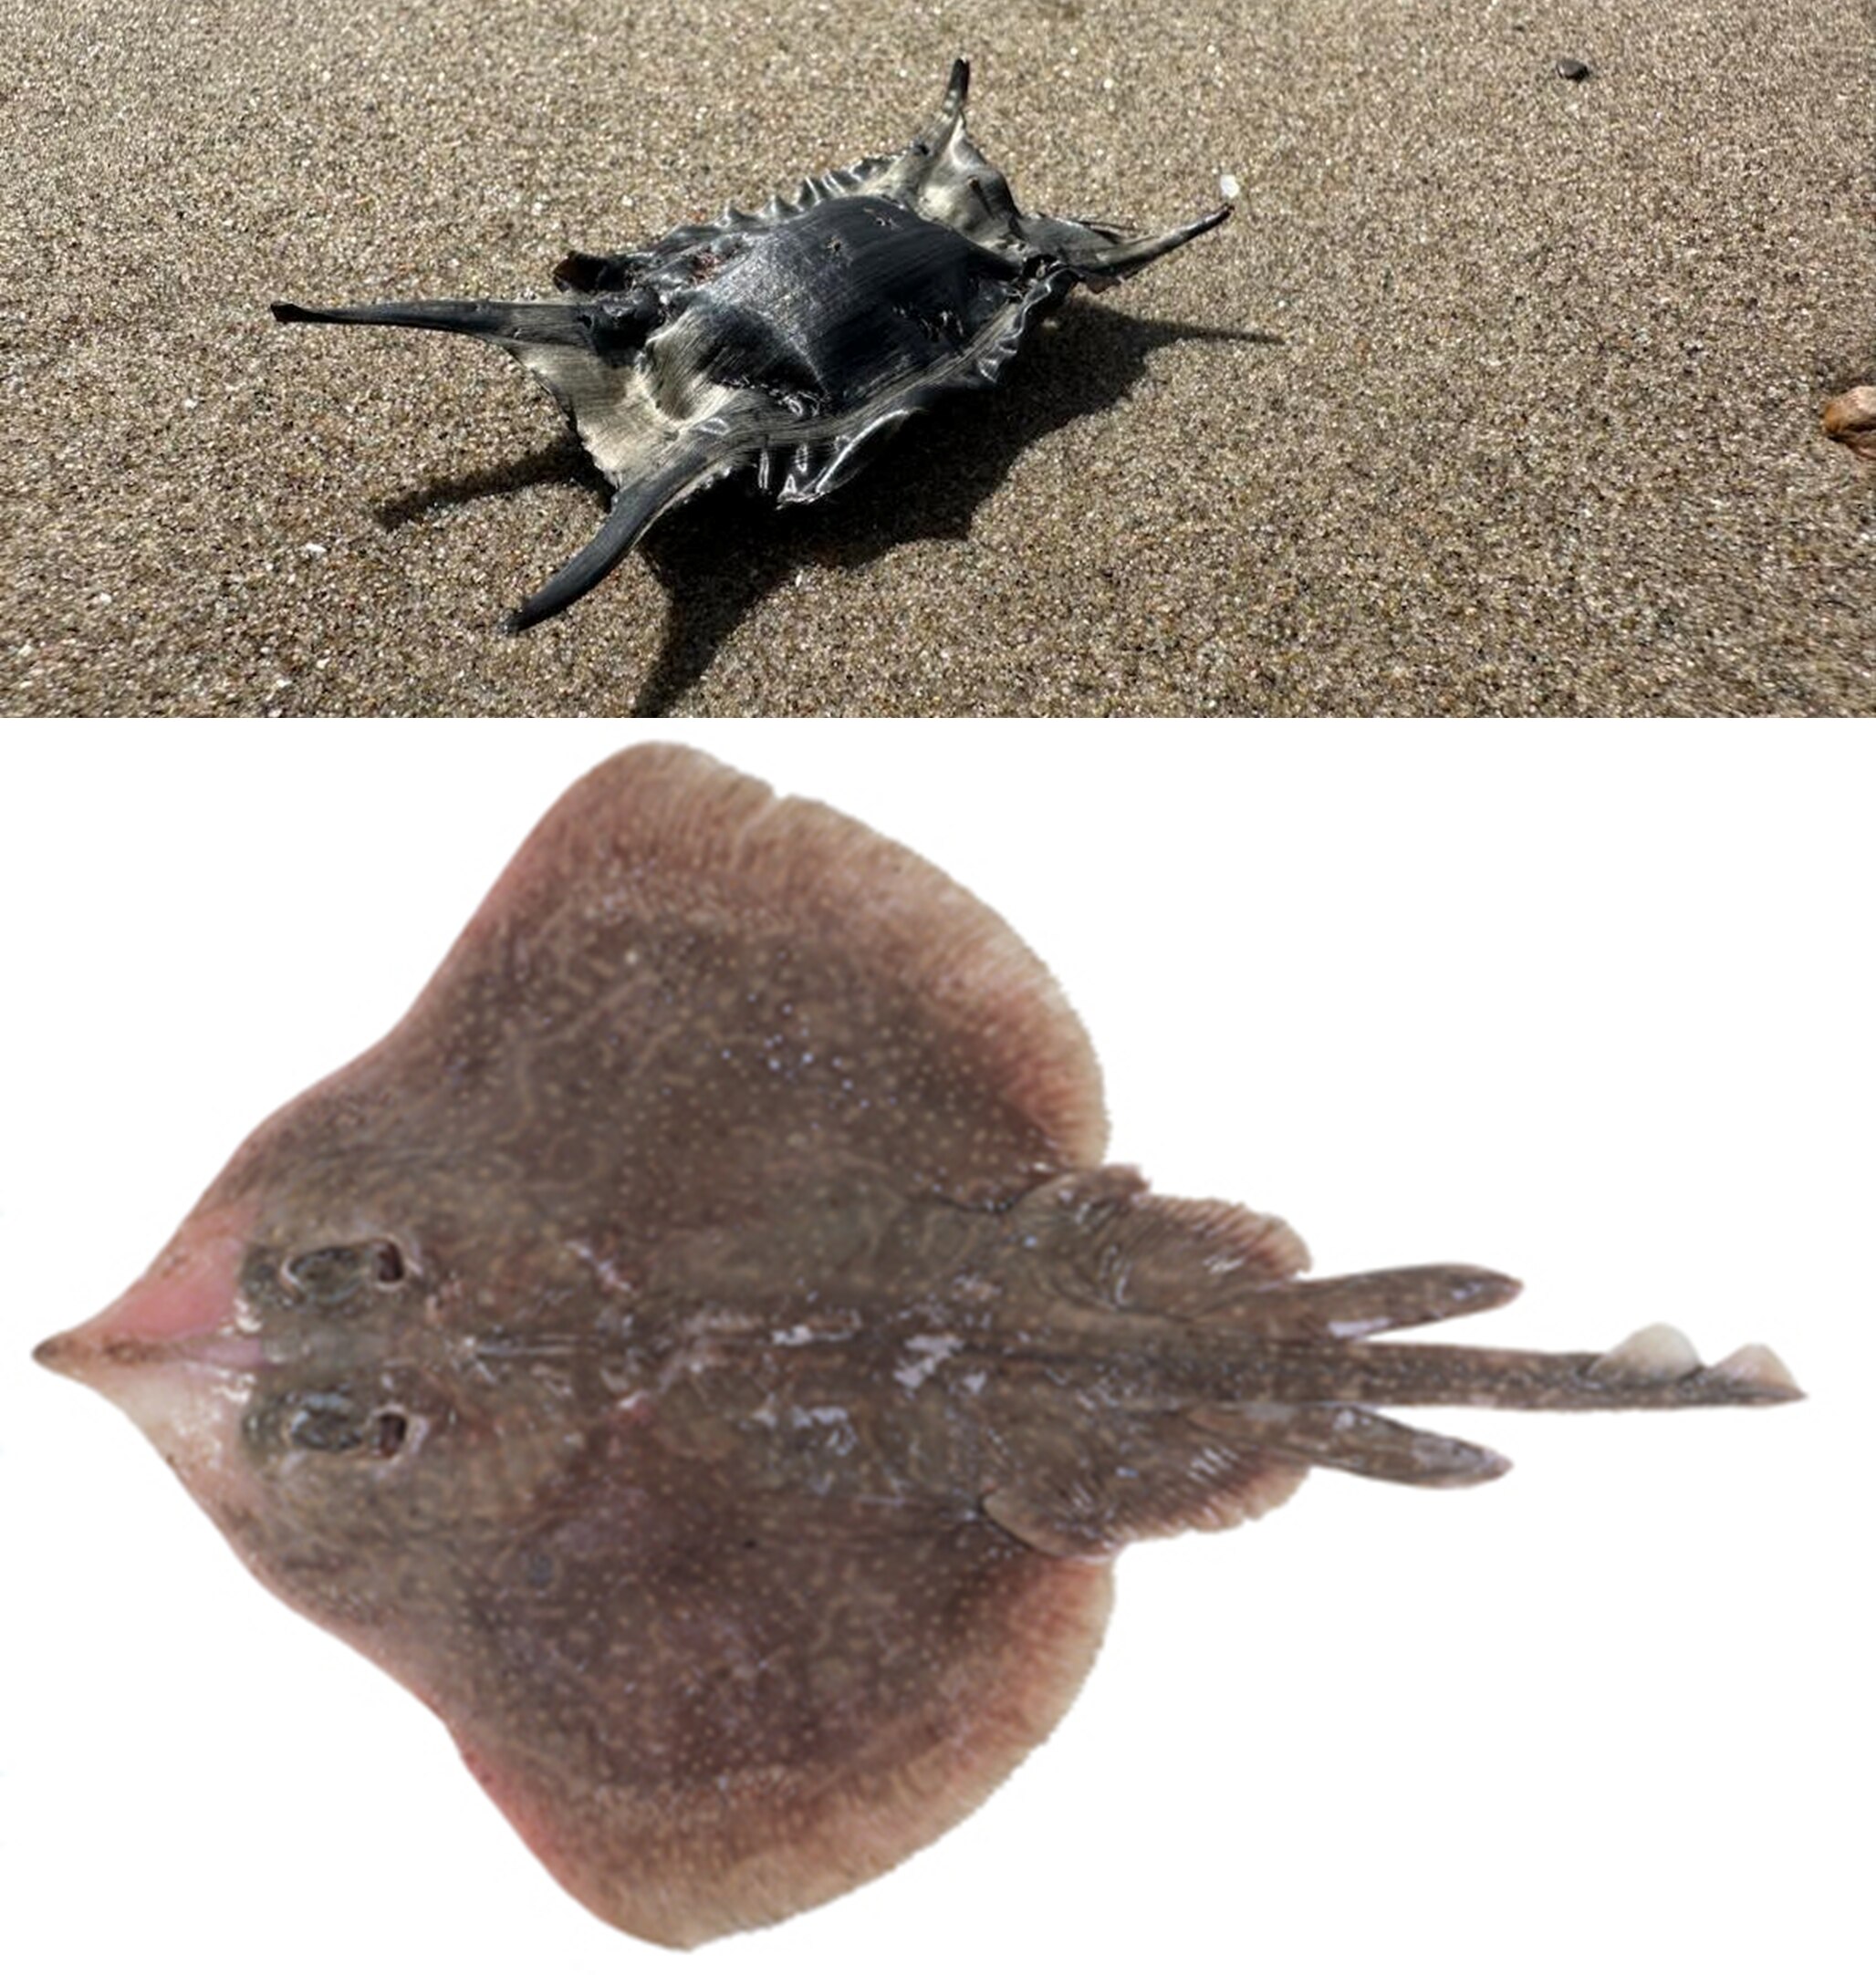 Pictuire of an eggcase on beach and picture of dead skate from above